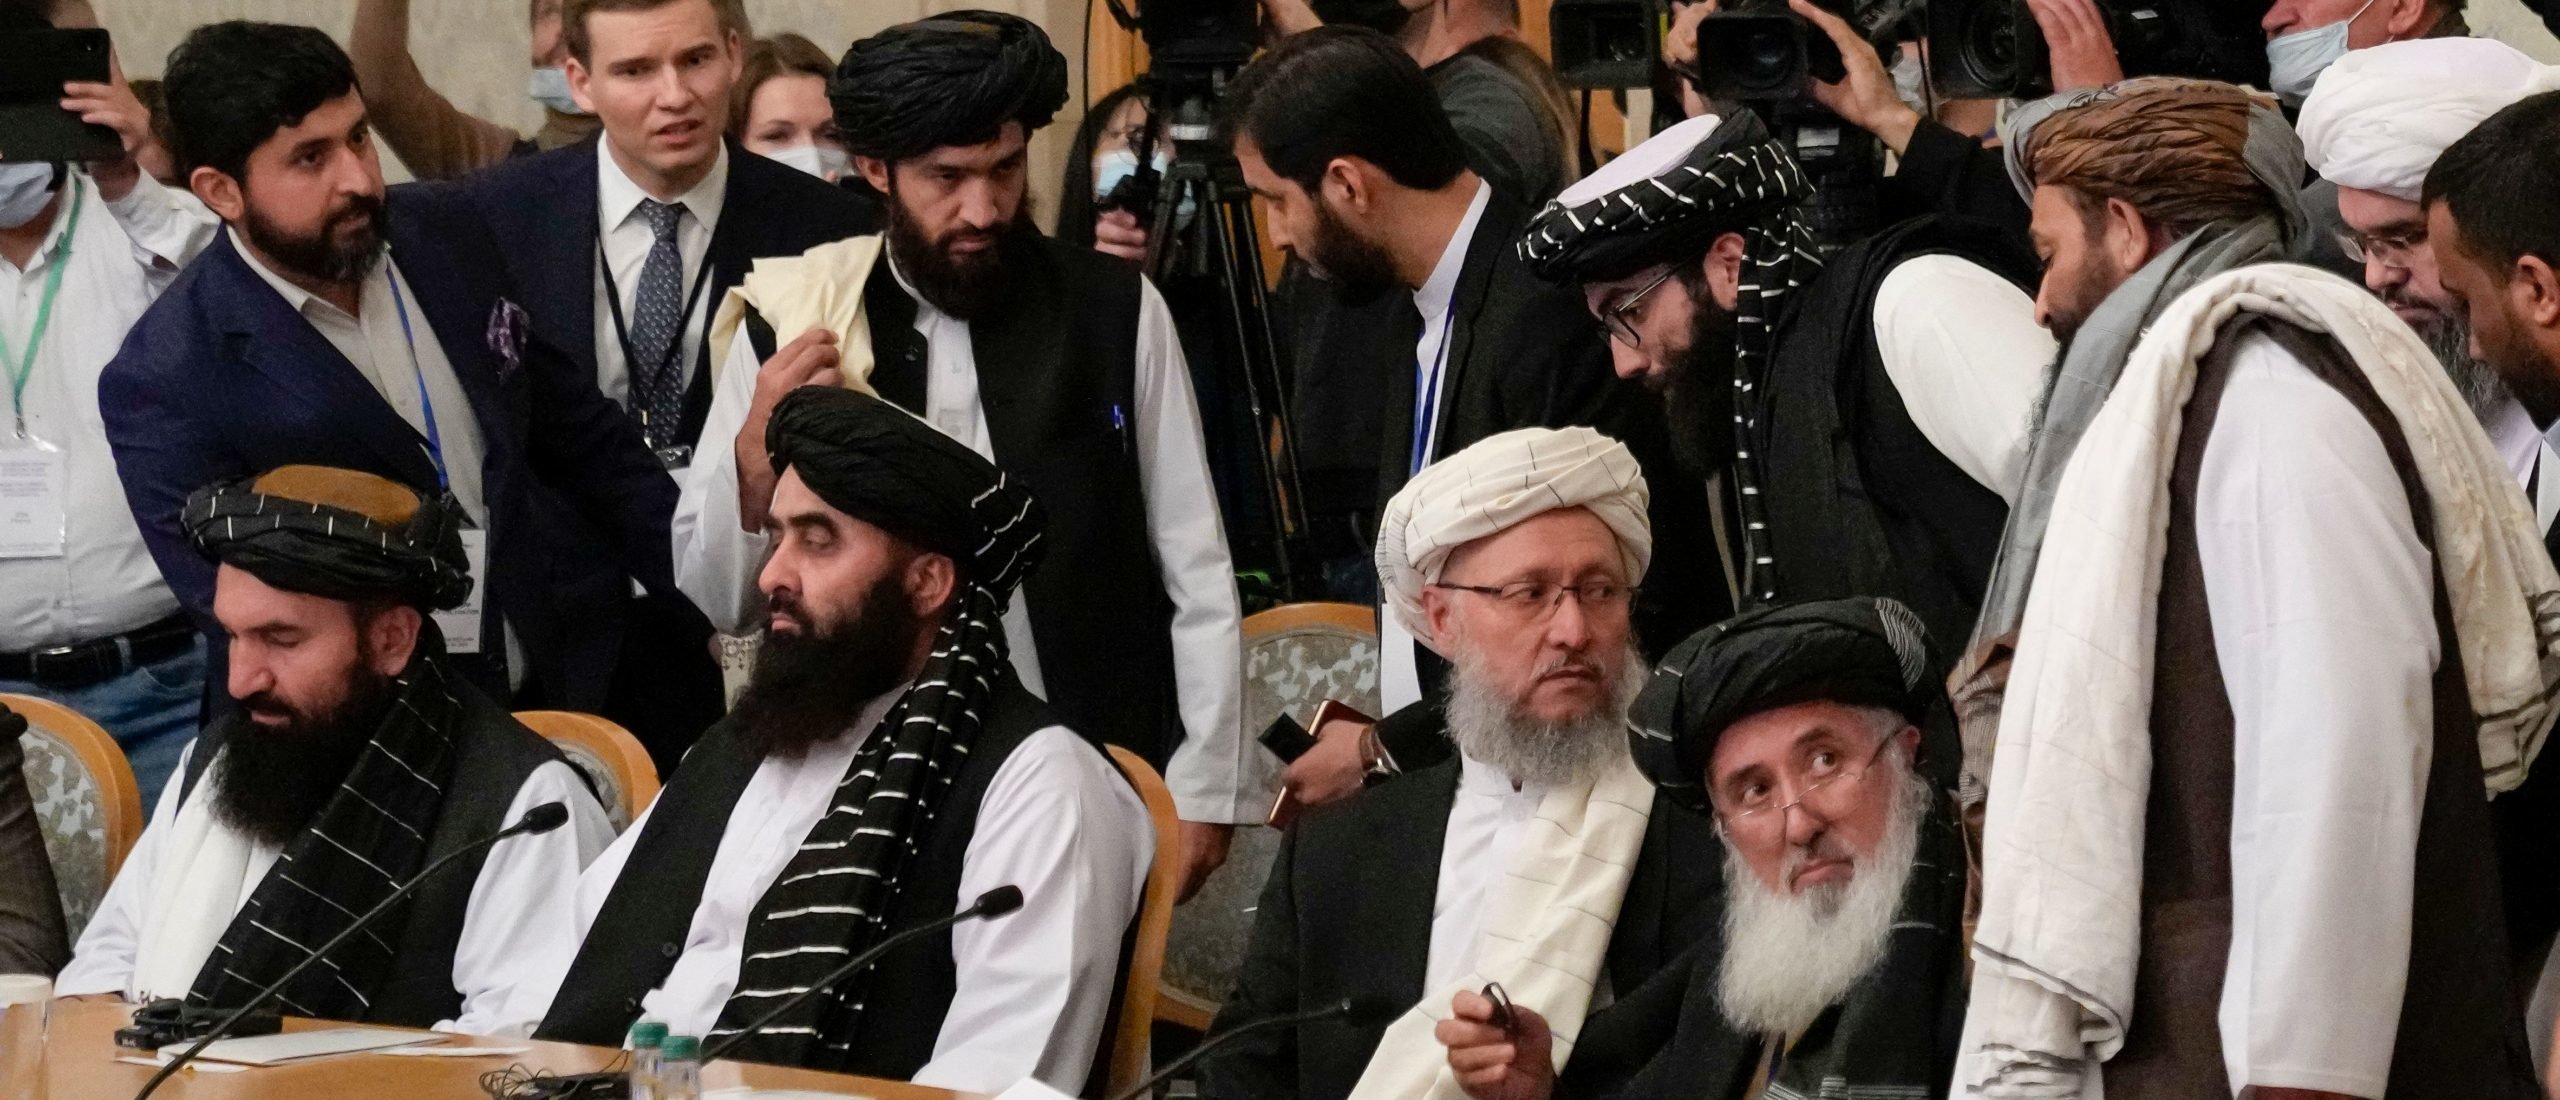 Members of the Taliban delegation, icluding deputy prime minister Abdul Salam Hanafi (C), attend an international conference on Afghanistan in Moscow on October 20, 2021. (Photo by Alexander Zemlianichenko / POOL / AFP) (Photo by ALEXANDER ZEMLIANICHENKO/POOL/AFP via Getty Images)